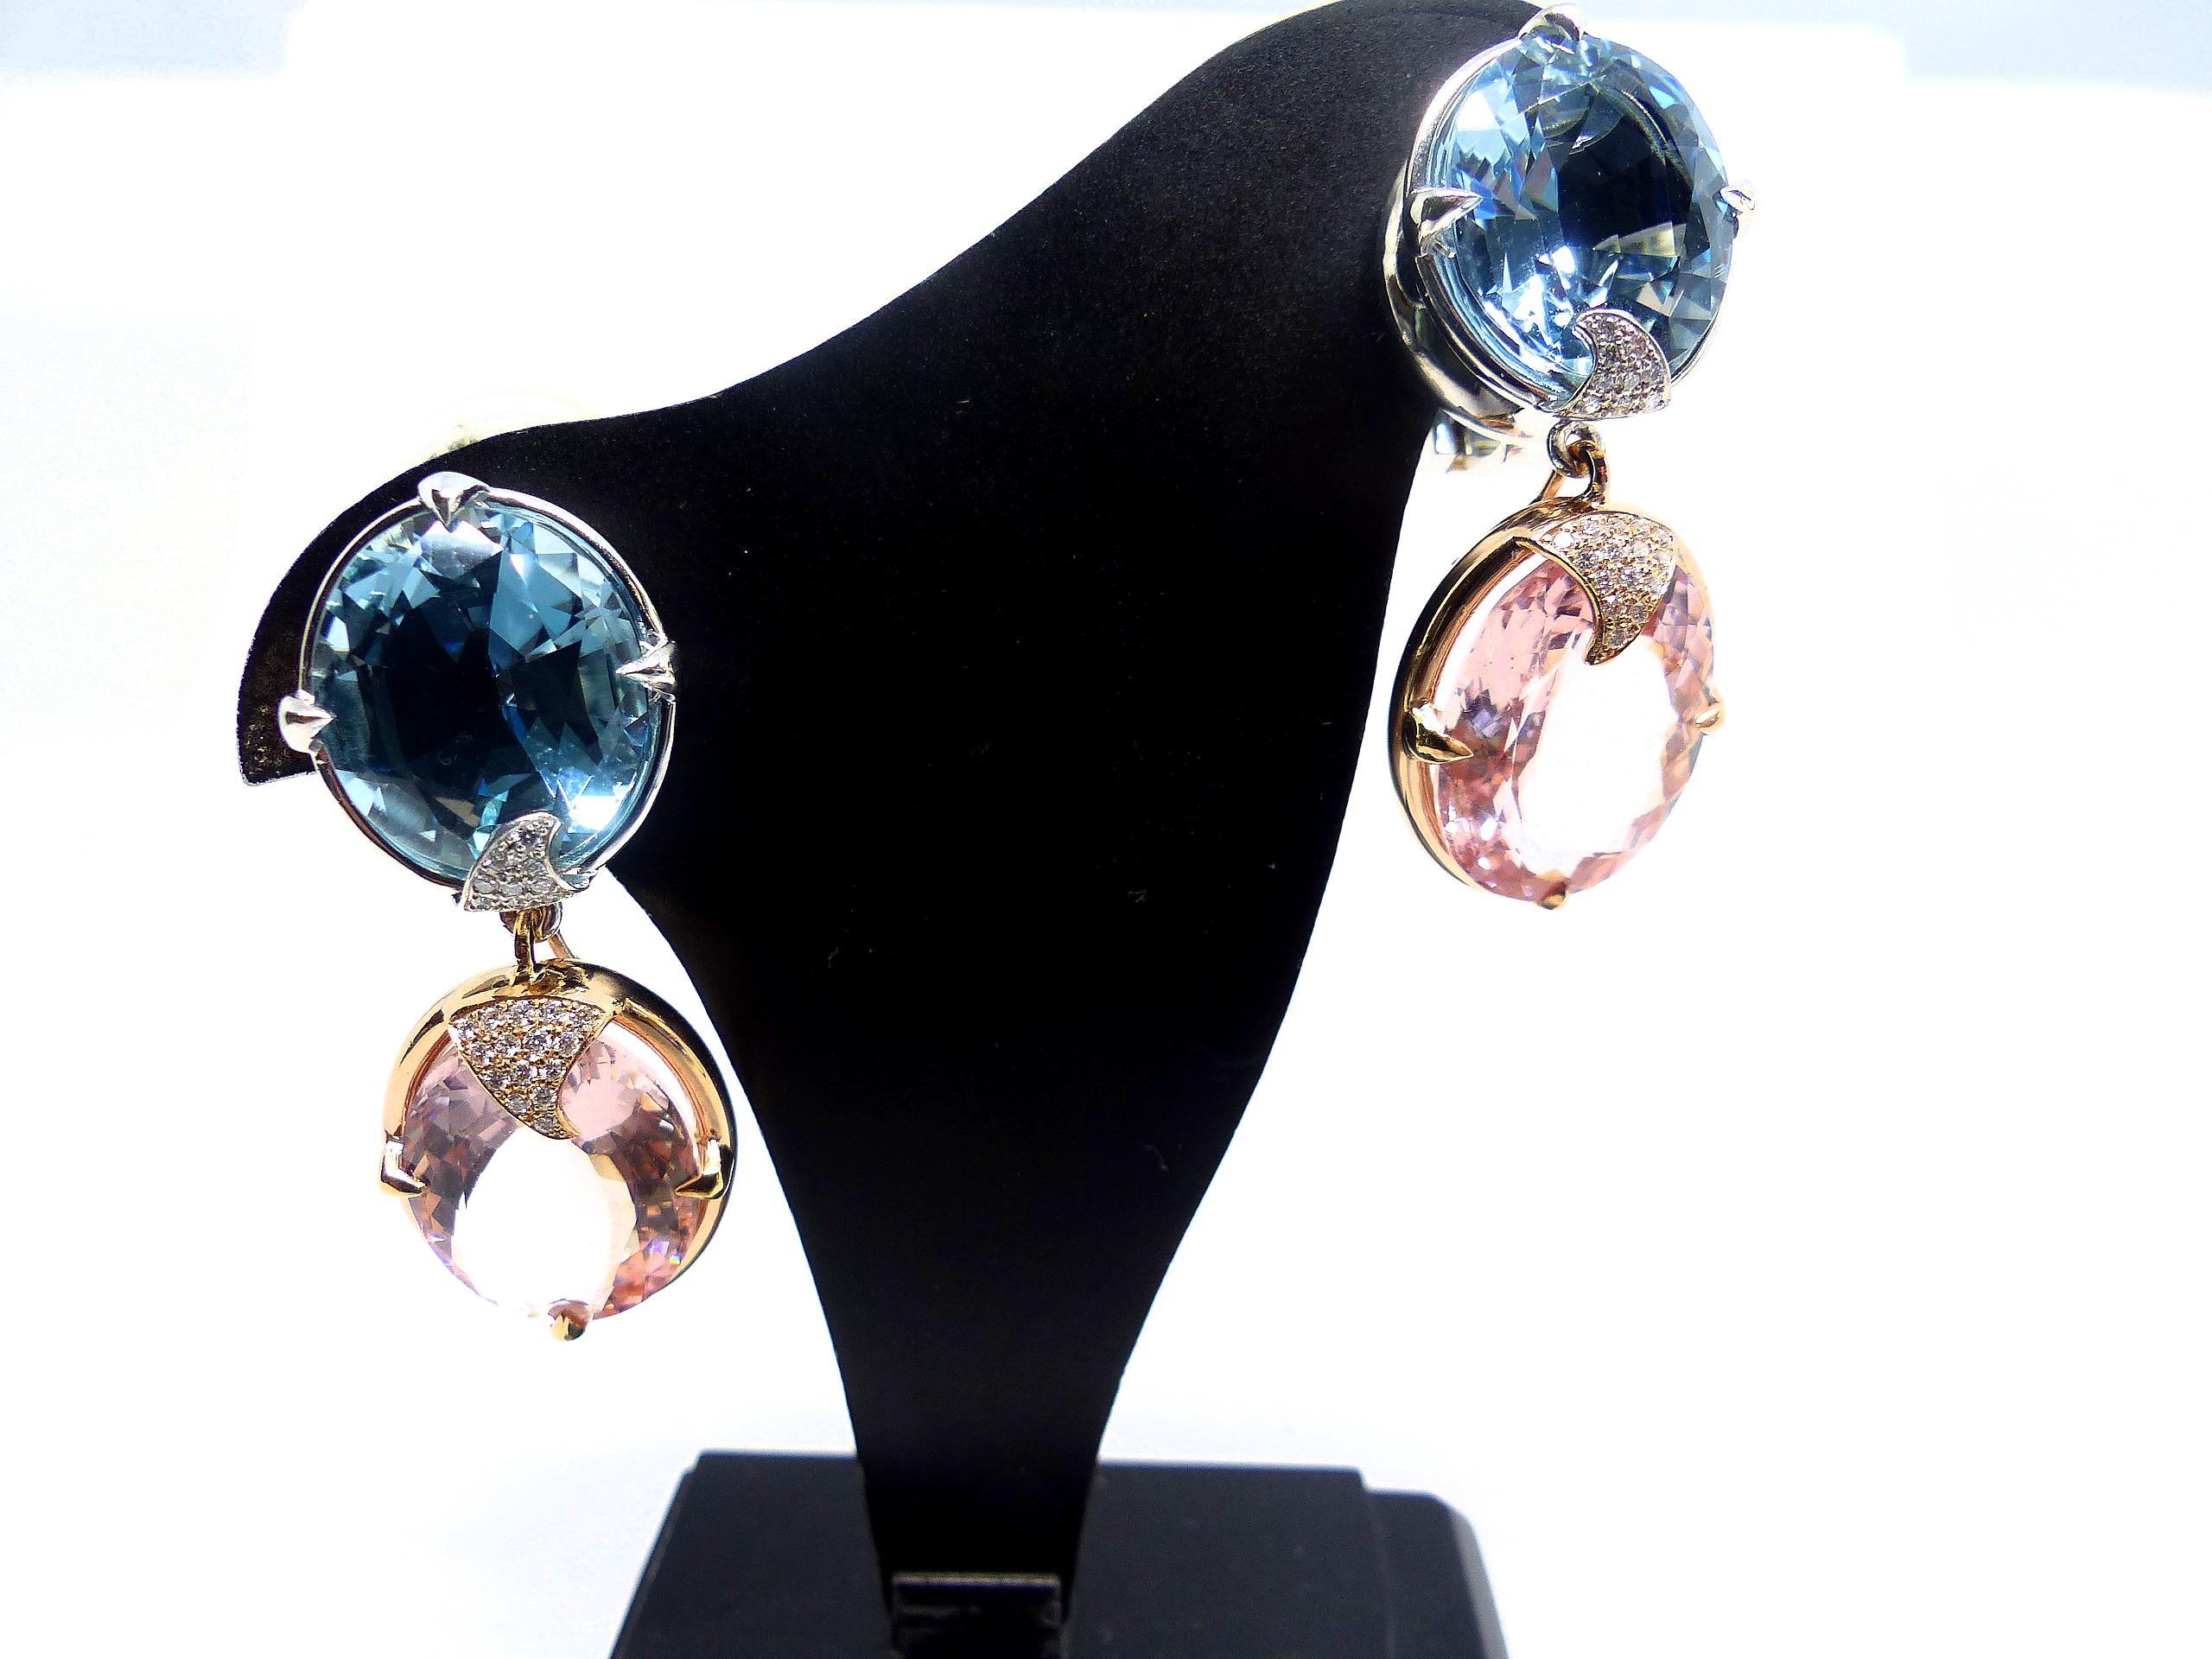 Women's Earrings in White/Red Gold with 2 Aquamarines and 2 Morganites and Diamonds. For Sale